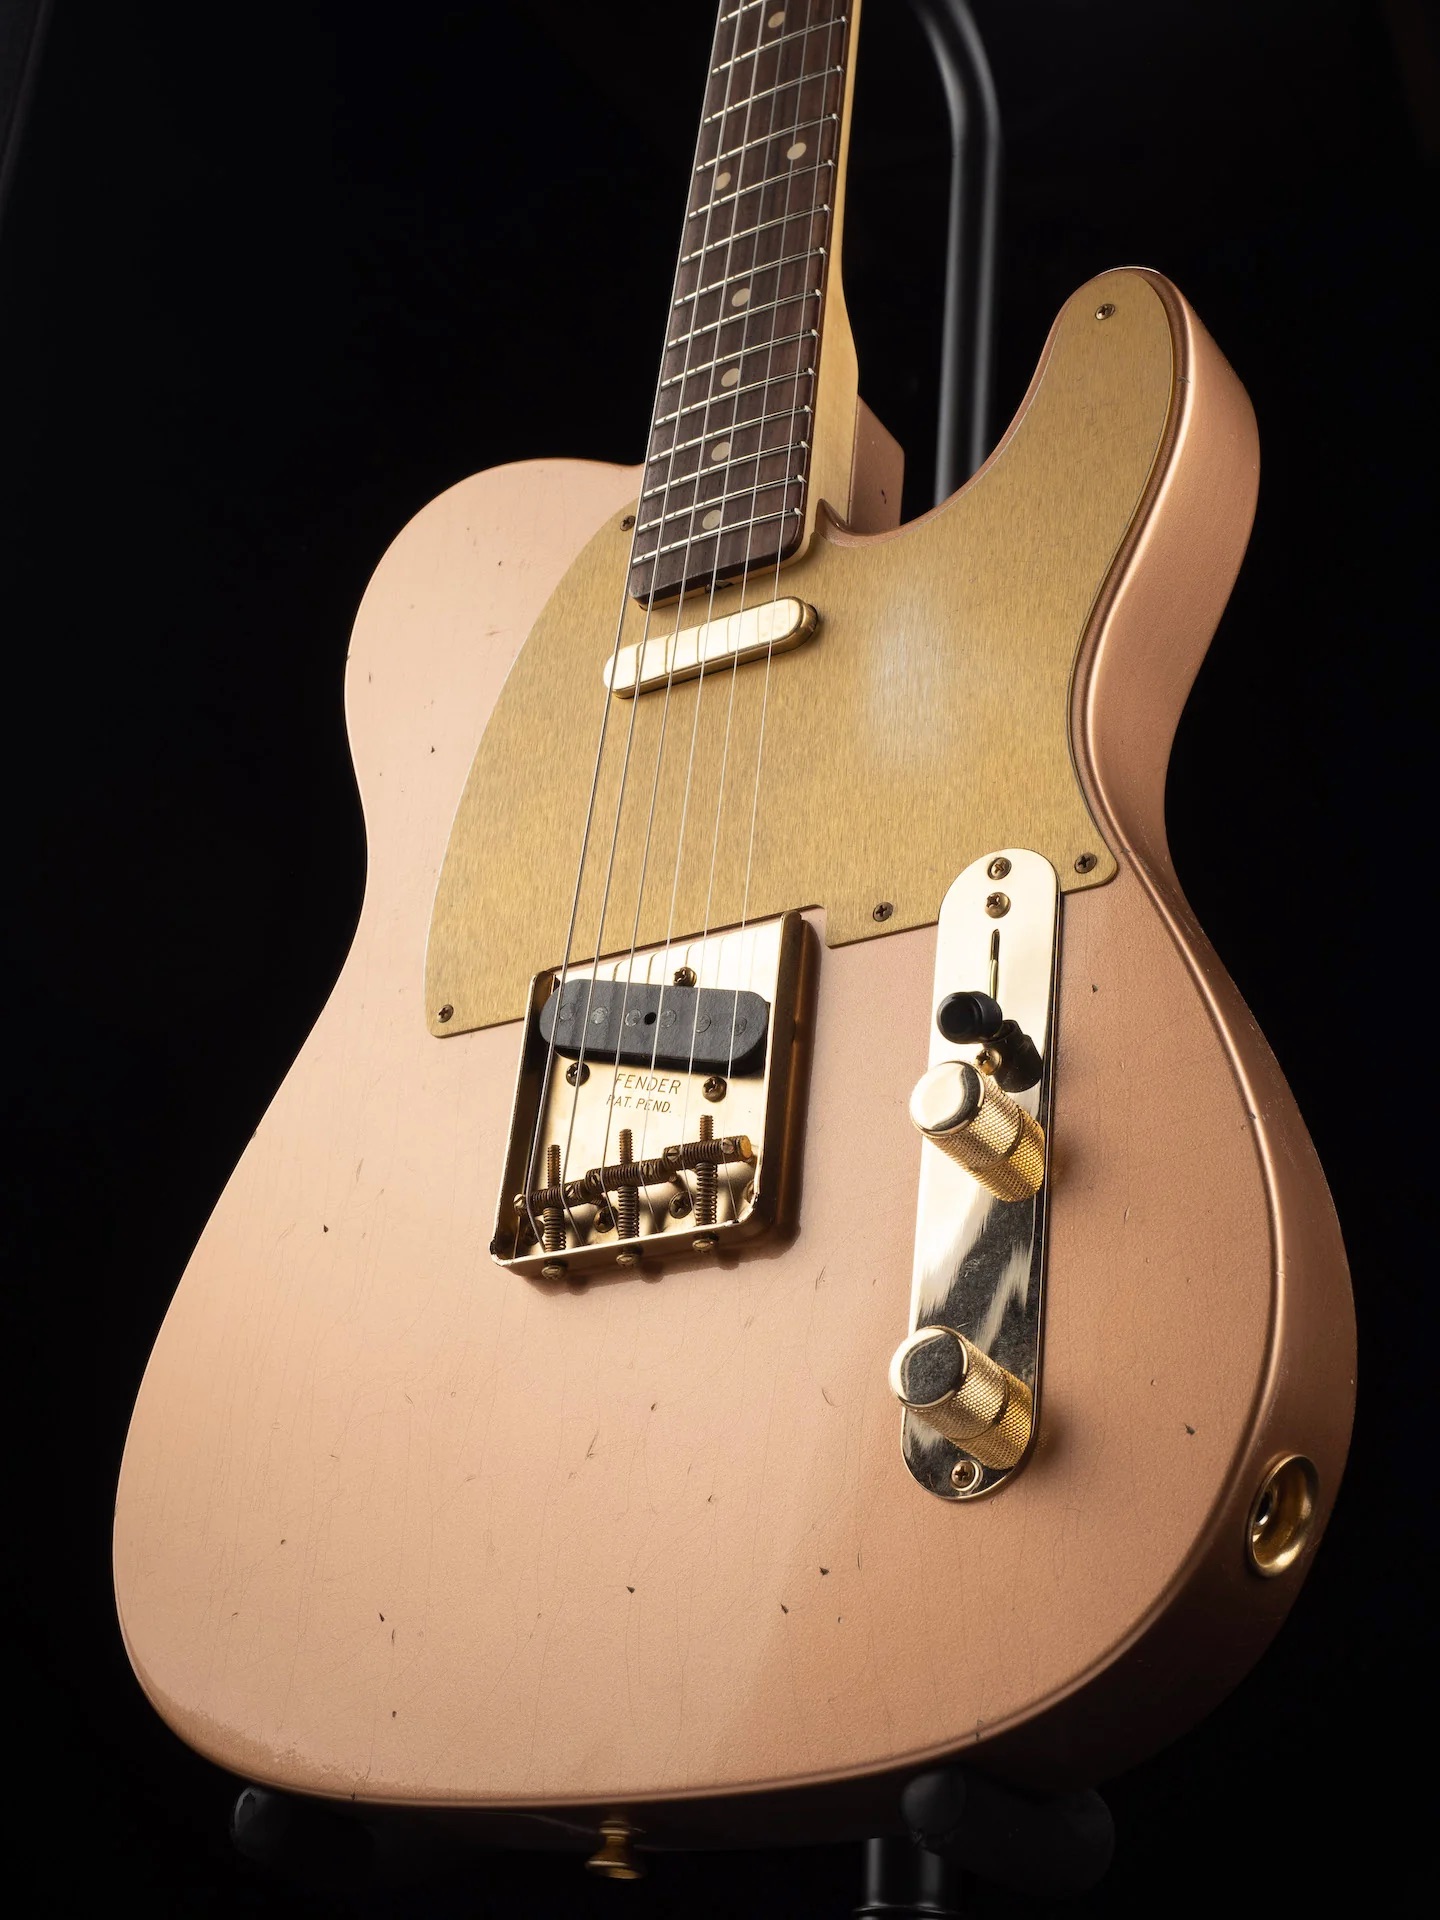 Telecaster Love Thread, No Archtops Allowed-6-p7080146_1440x1920-jpeg